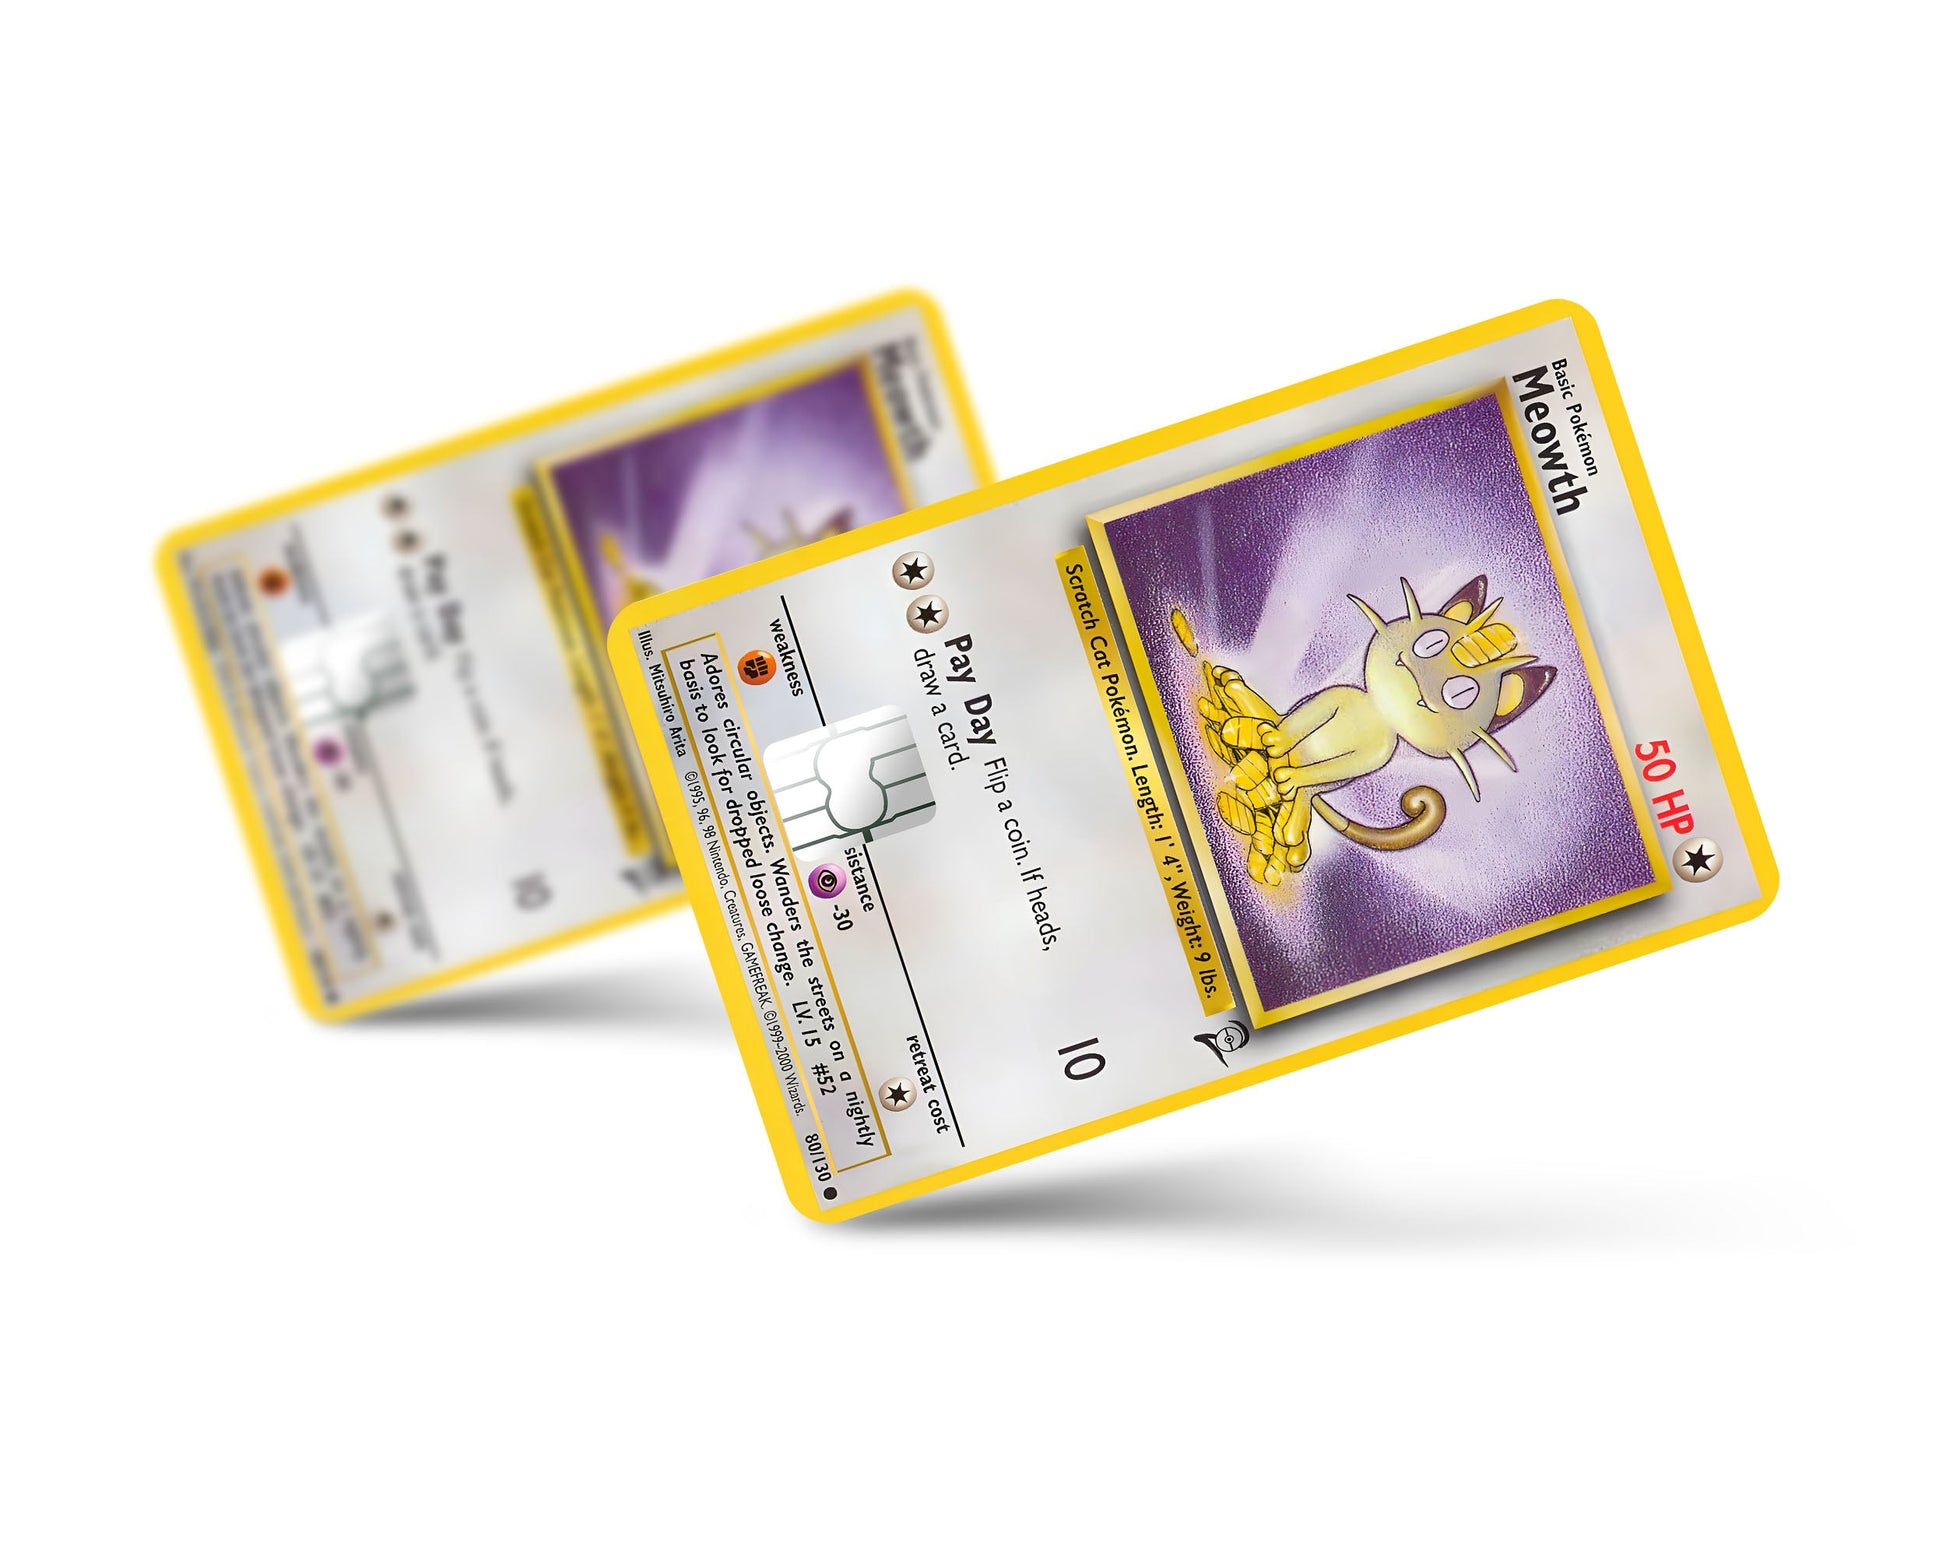 Anime Town Creations Credit Card Meowth Pokemon Card Full Skins - Anime Pokemon Credit Card Skin